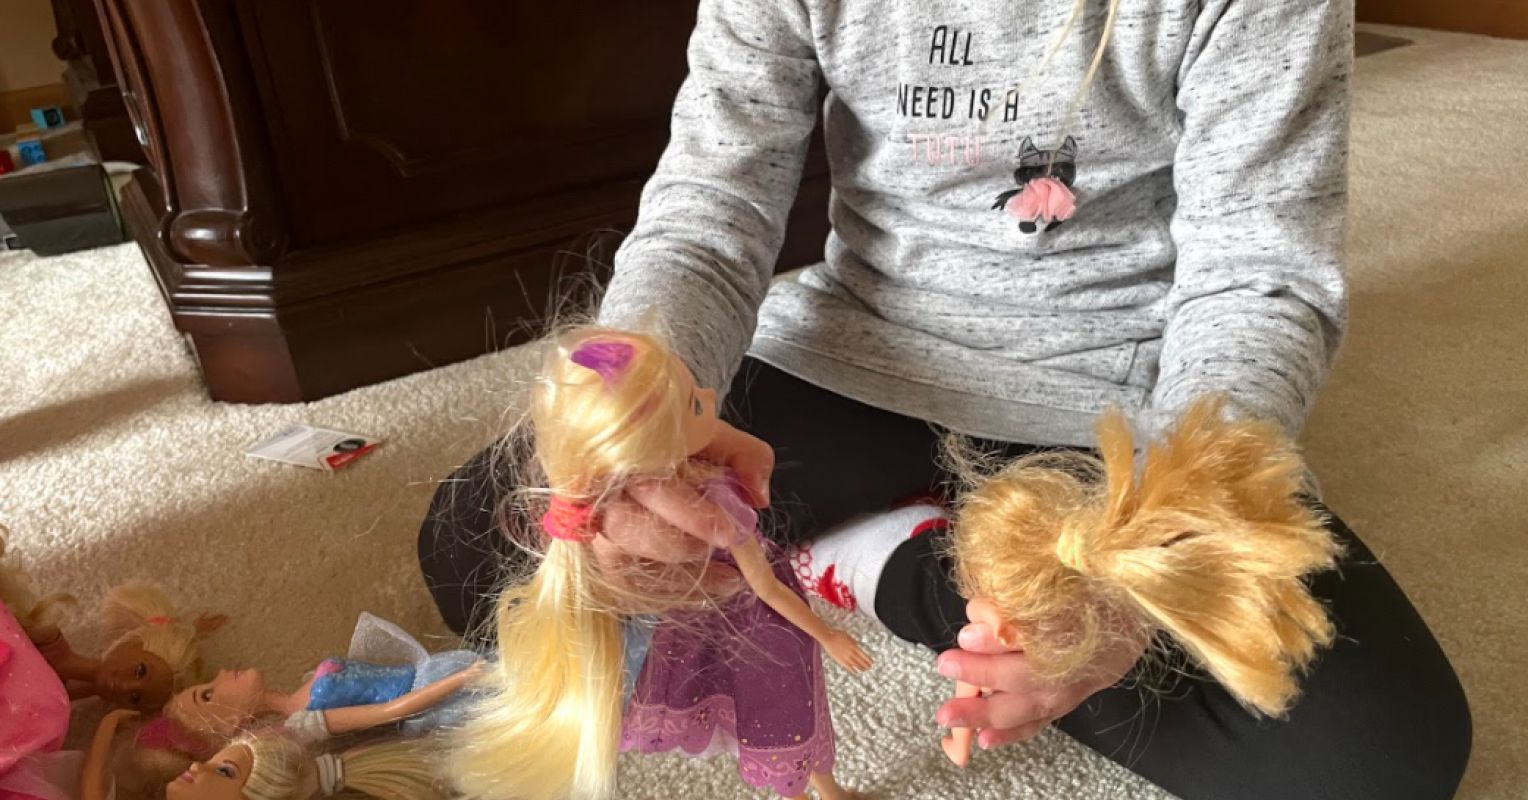 Barbies May Do Damage That Realistic Dolls Cant Undo Psychology Today